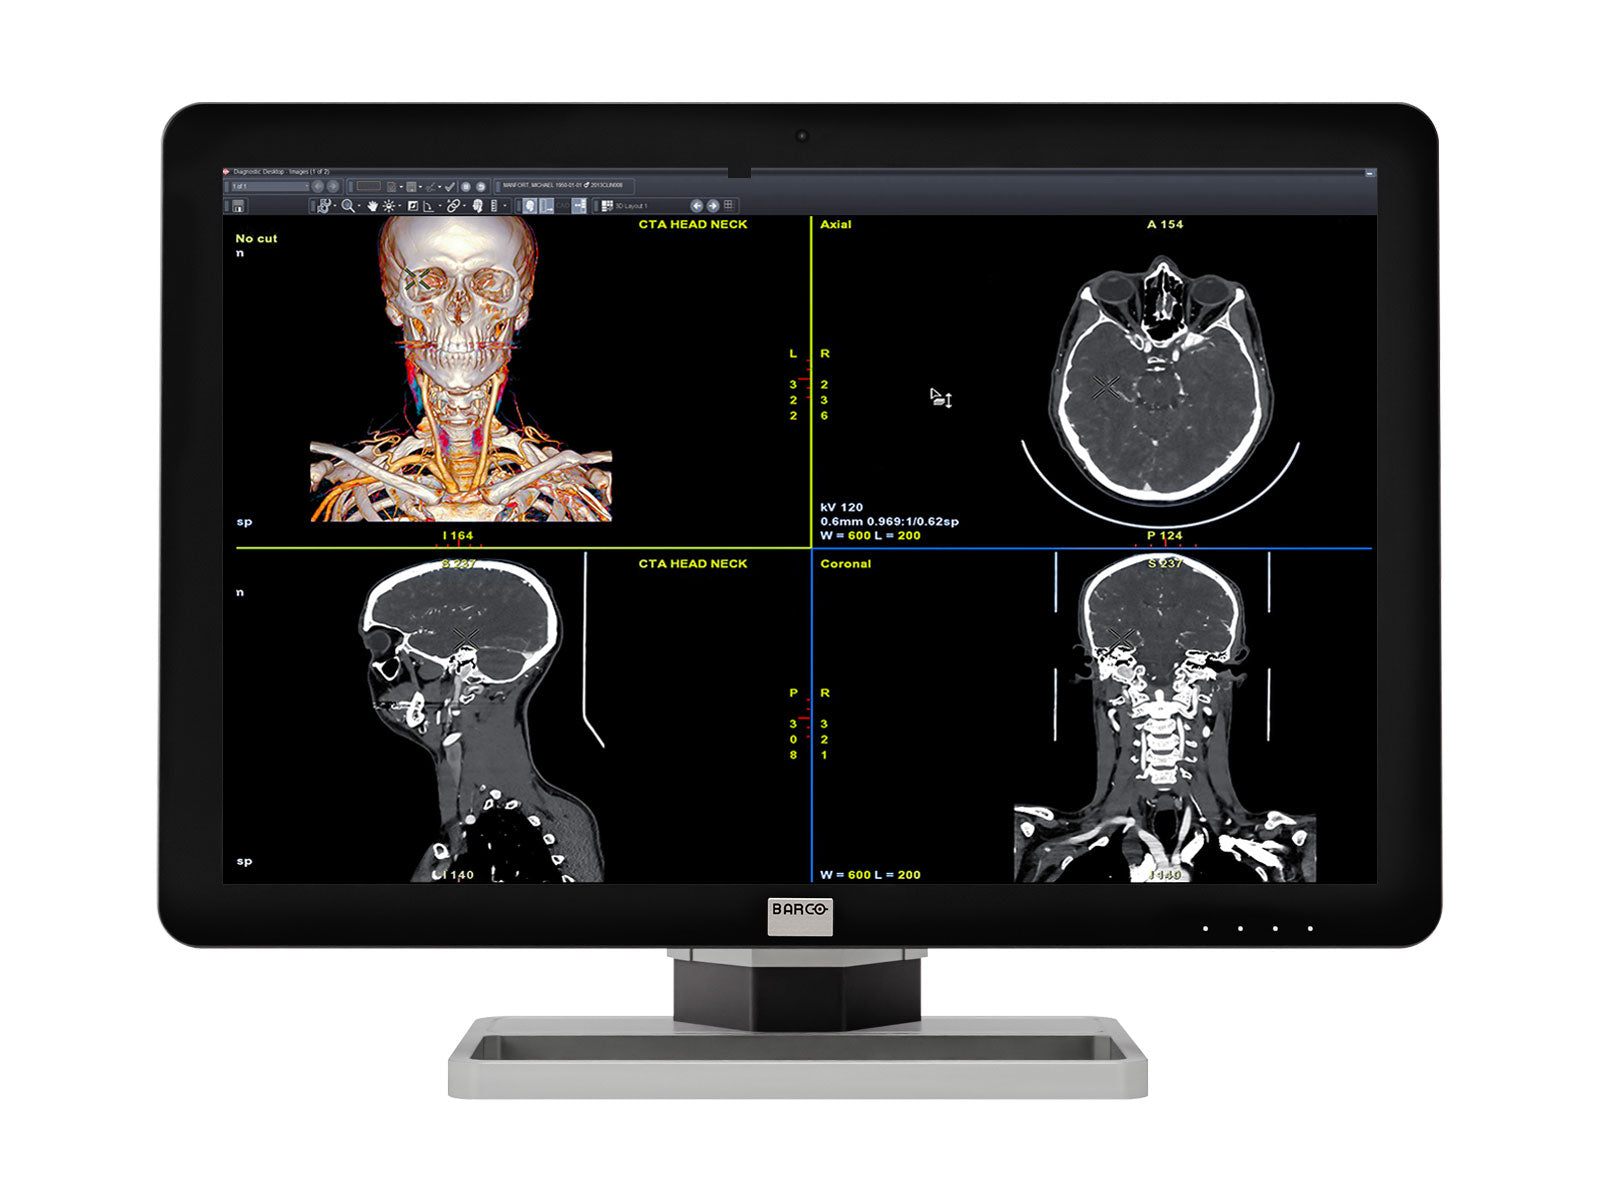 Barco General Radiology Reading Station | Coronis 6MP MDCC-6430 | Dell i9 Workstation | Nuance Mic | 24" Worklist Monitors (64305820) Monitors.com 